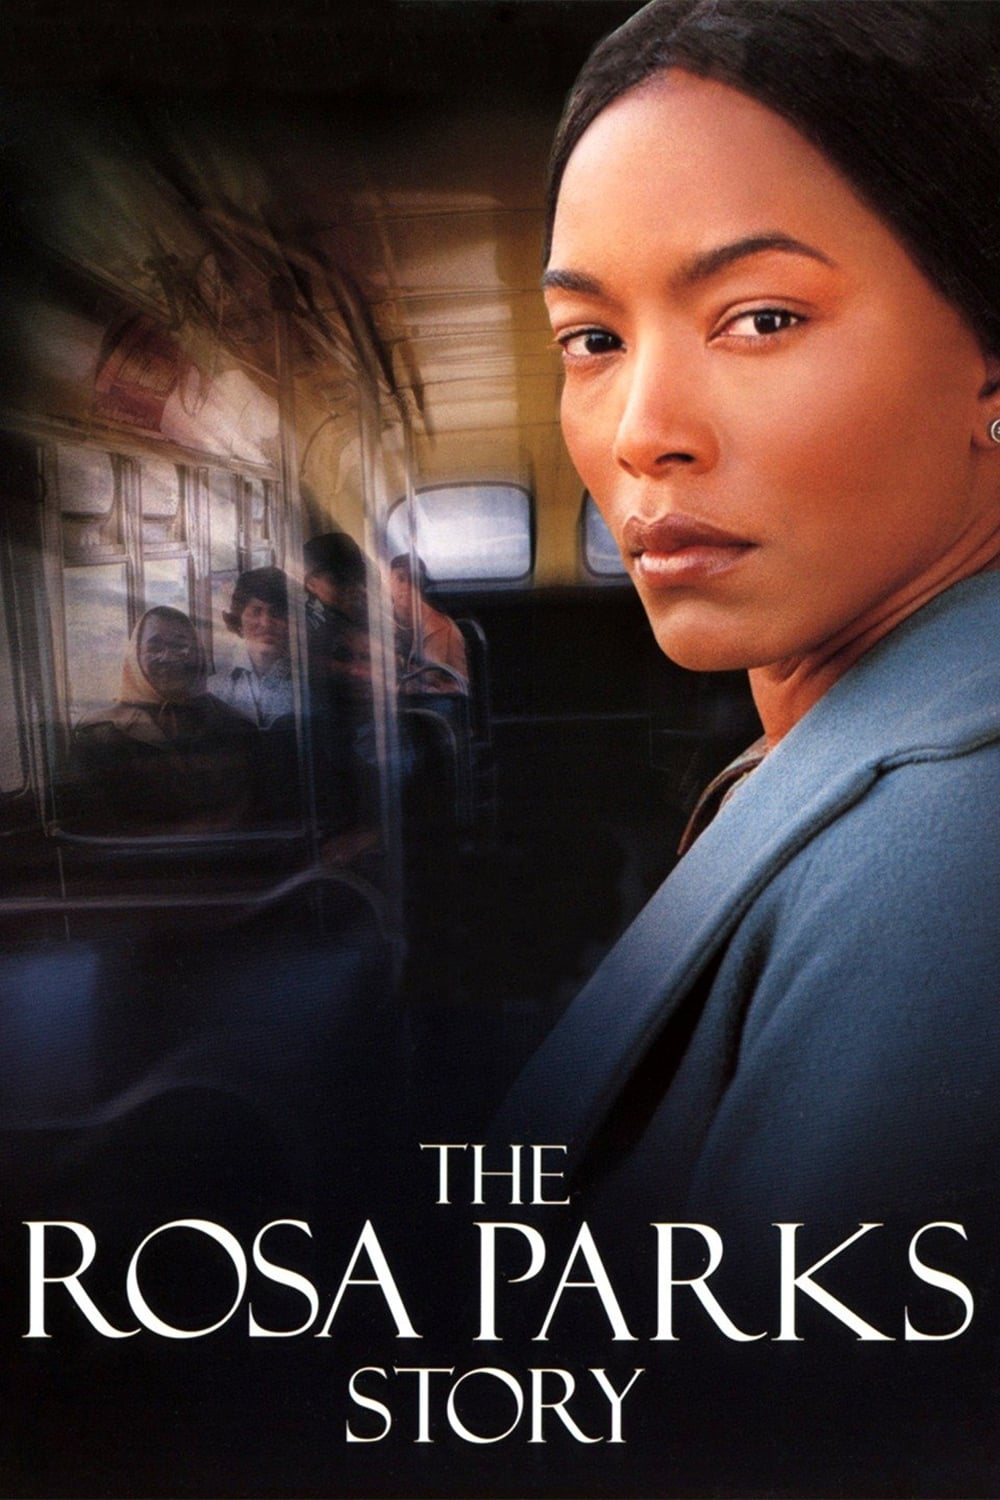 The Rosa Parks Story film